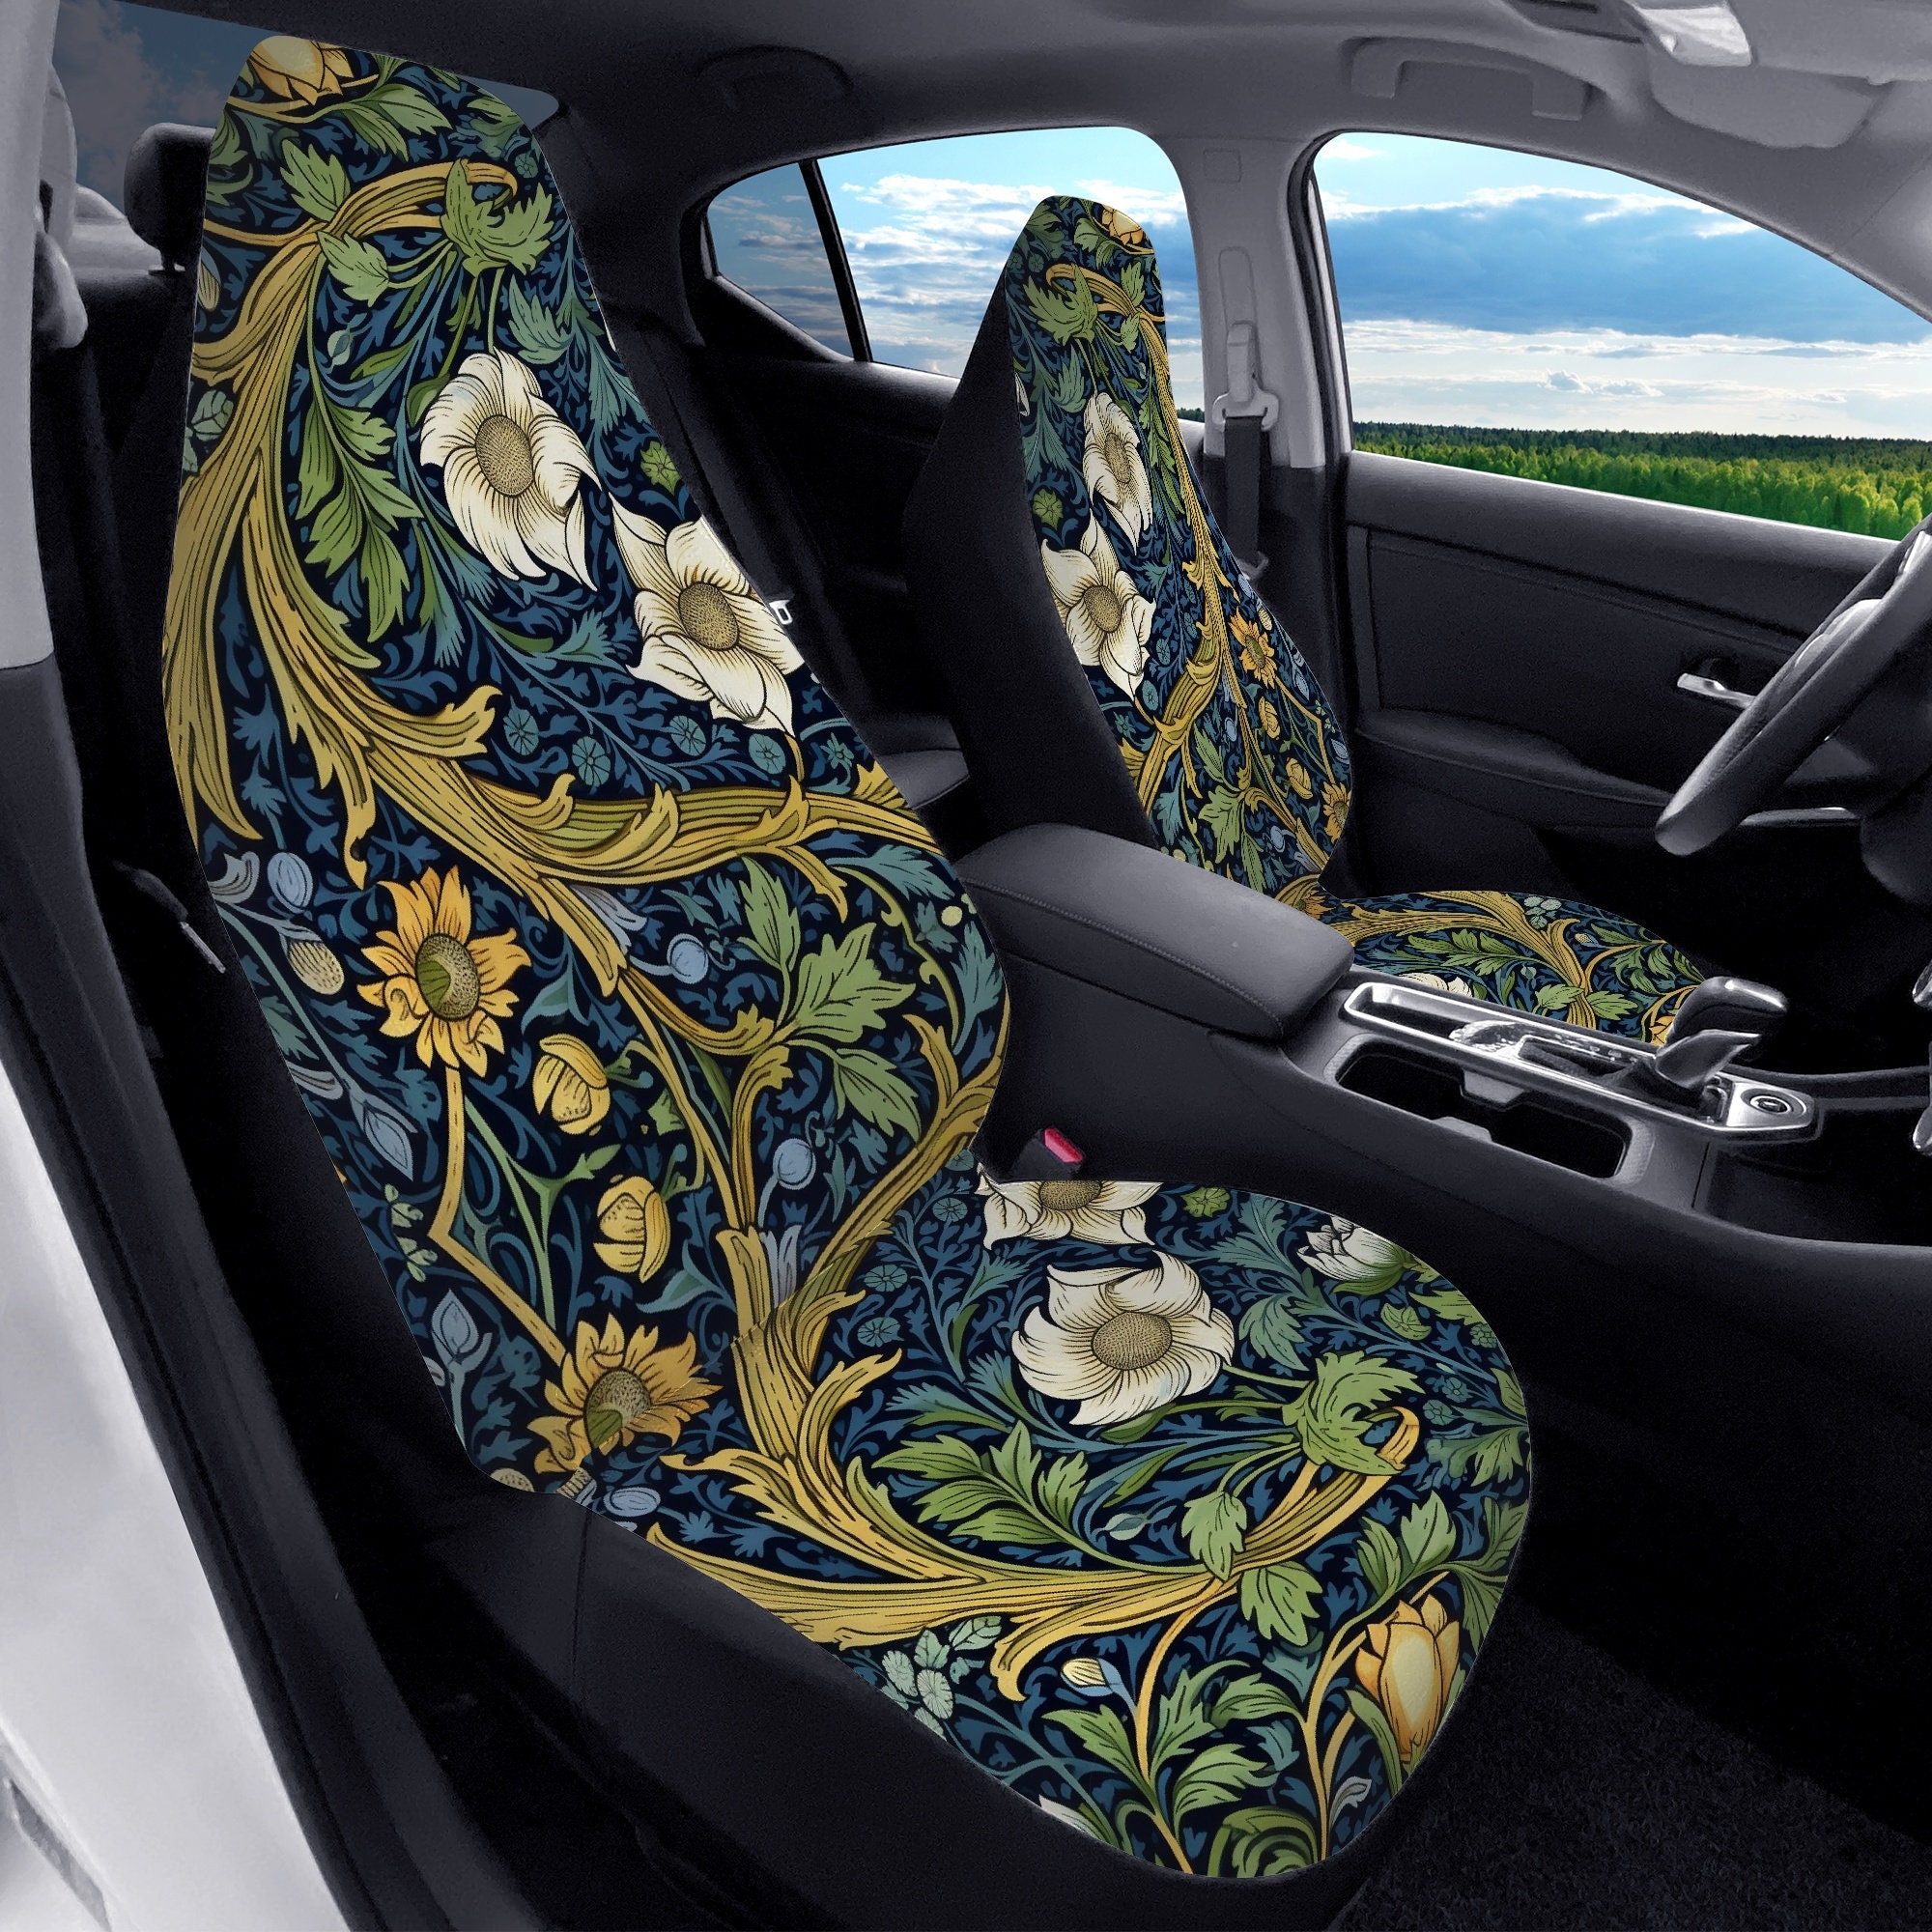 Discover Cottagecore Botanical Wildflower Car Seat Covers, Witchy Boho Floral Seat Protectors and Vehicle Decor, Cottagecore Car Interior Decor